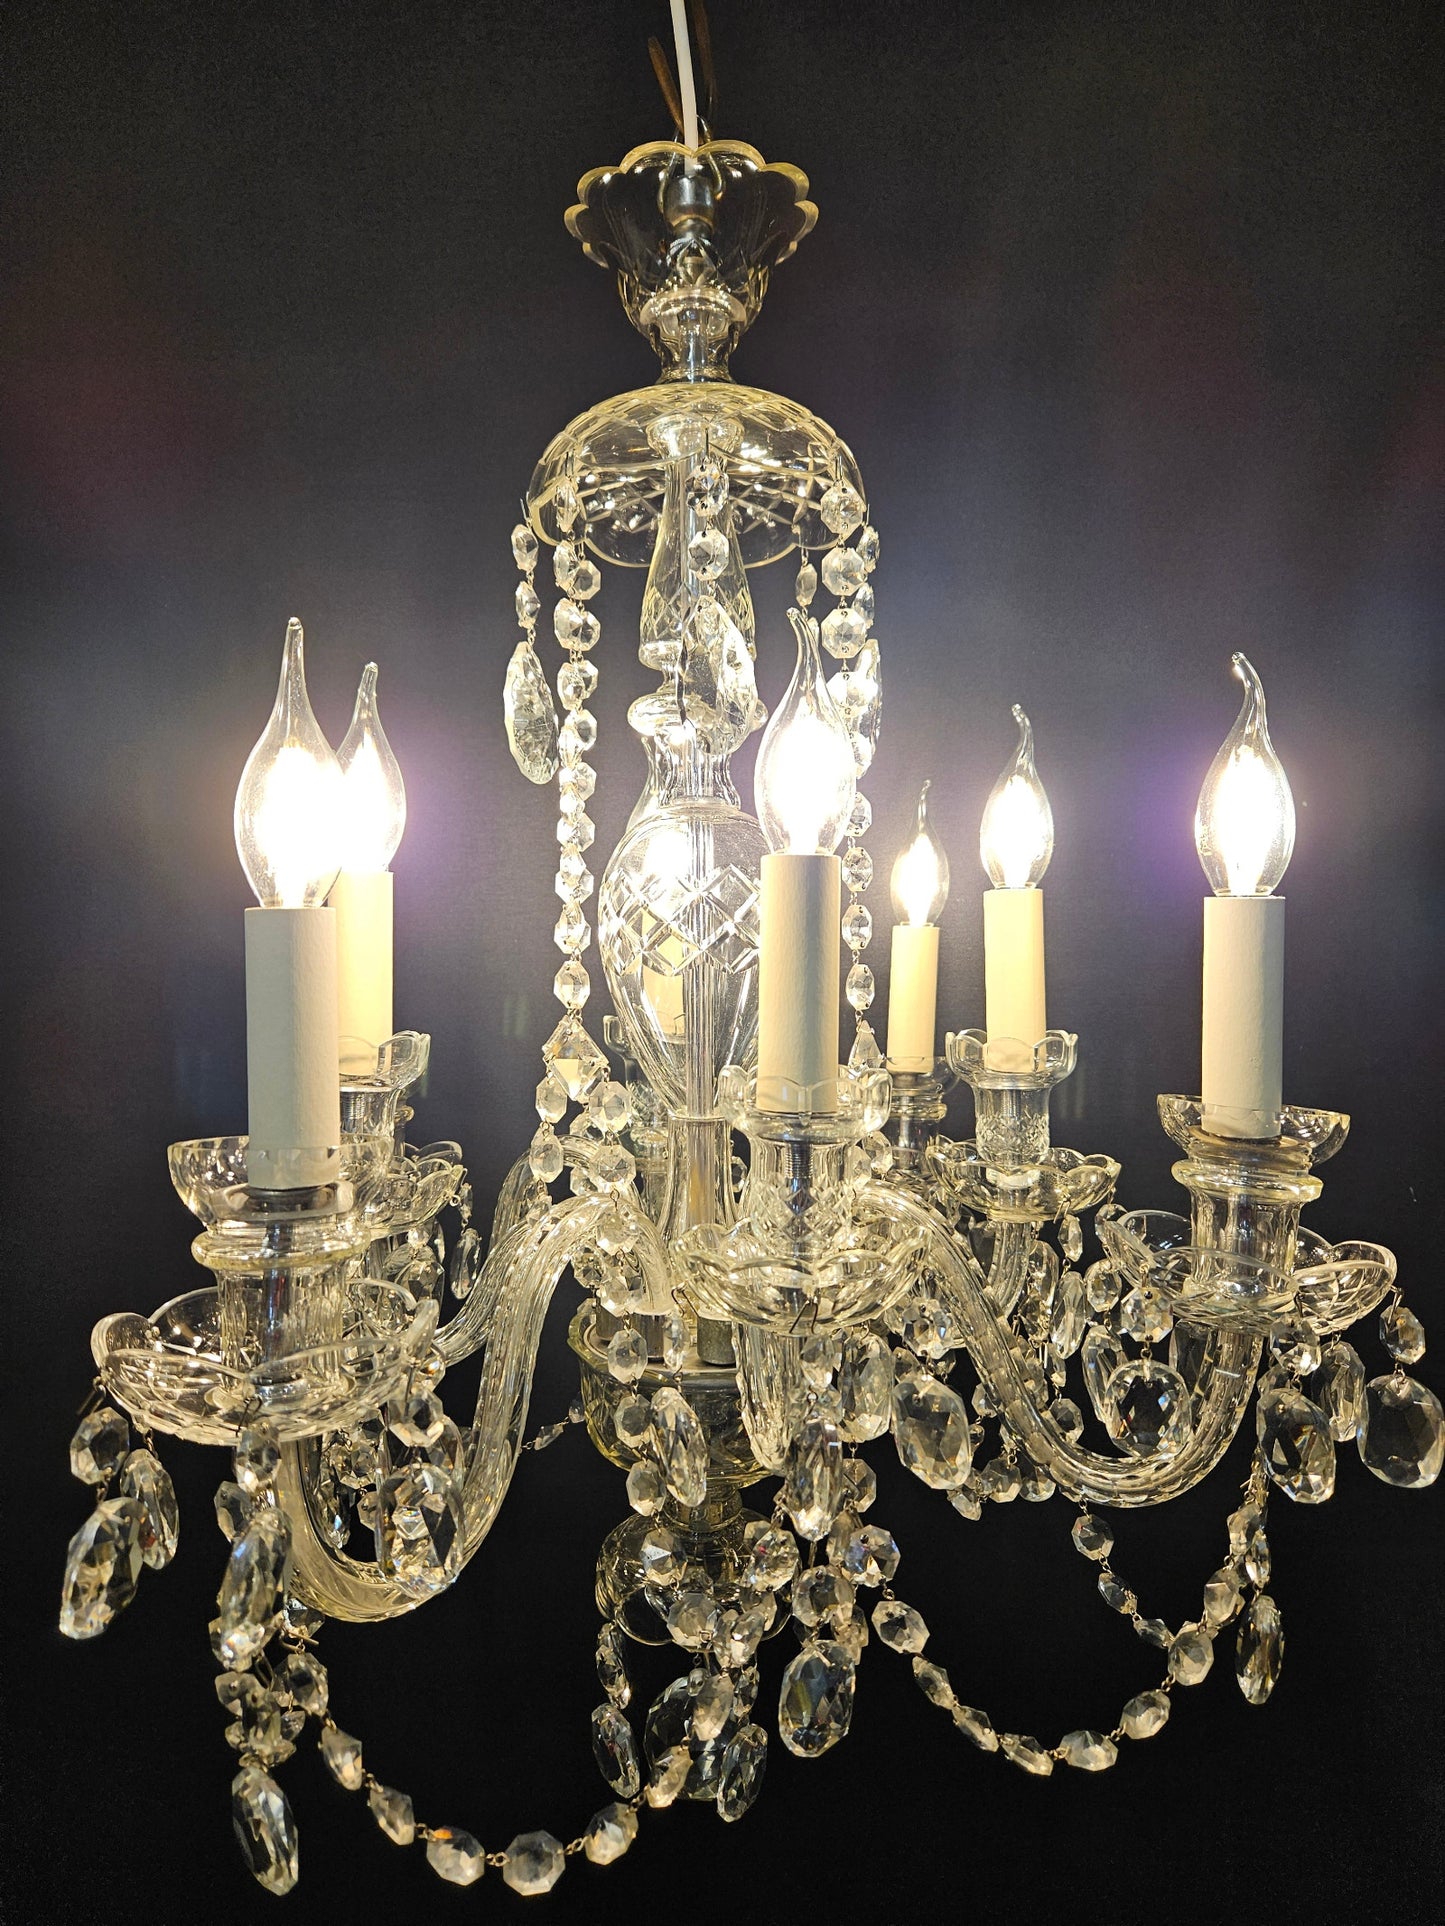 front view showing chandelier lit